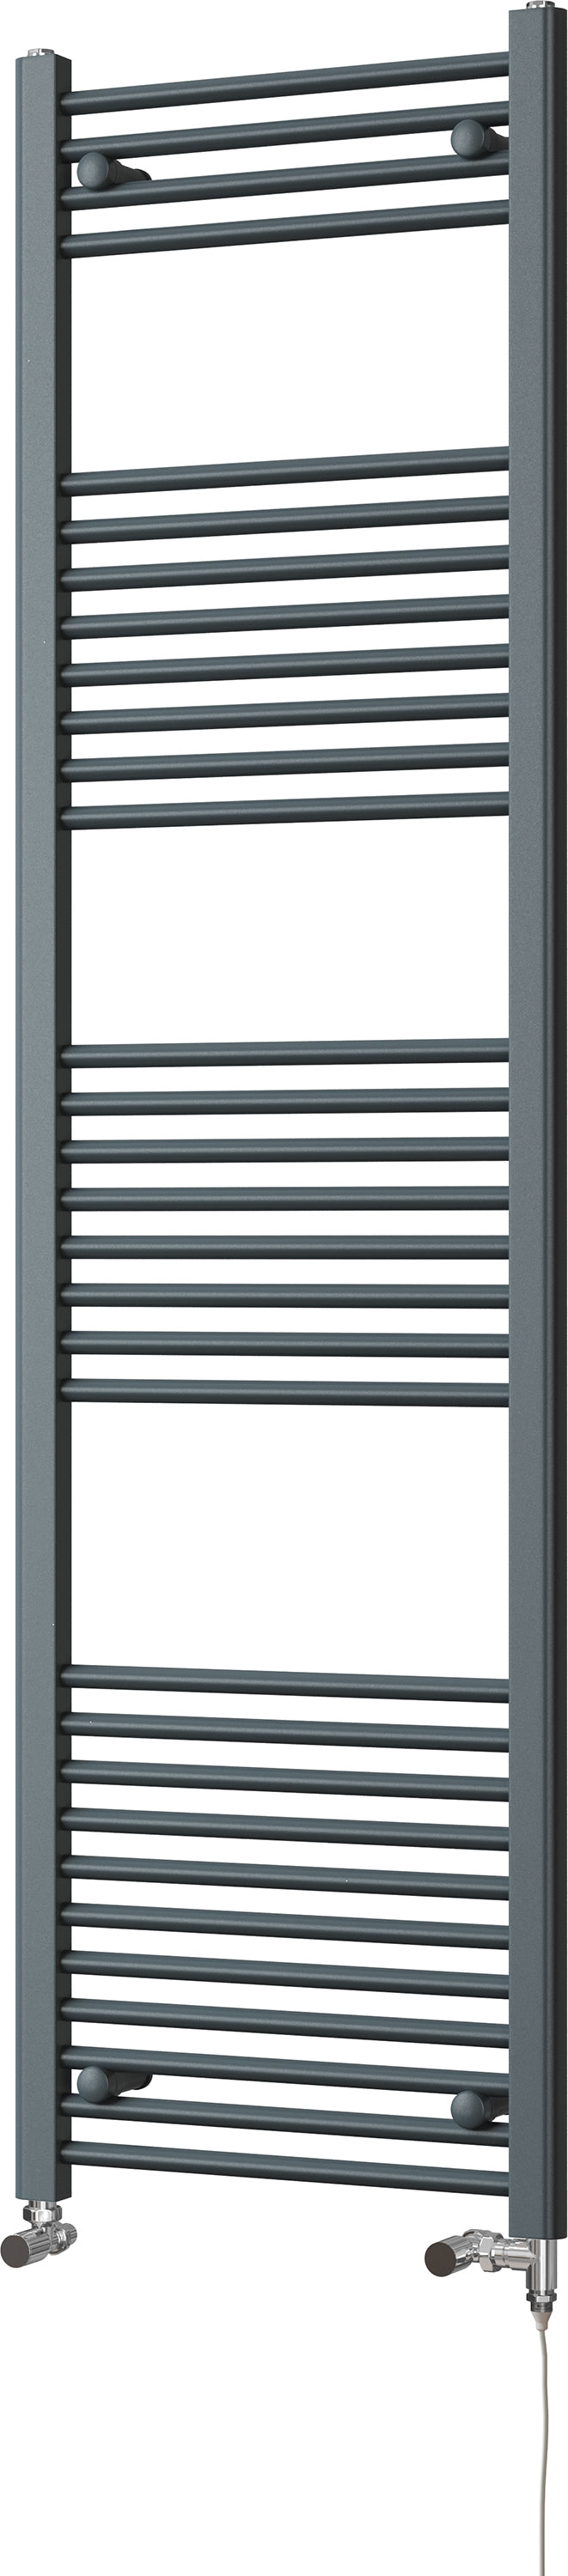 Zennor - Anthracite Dual Fuel Towel Rail  H1800mm x W500mm Standard - Straight